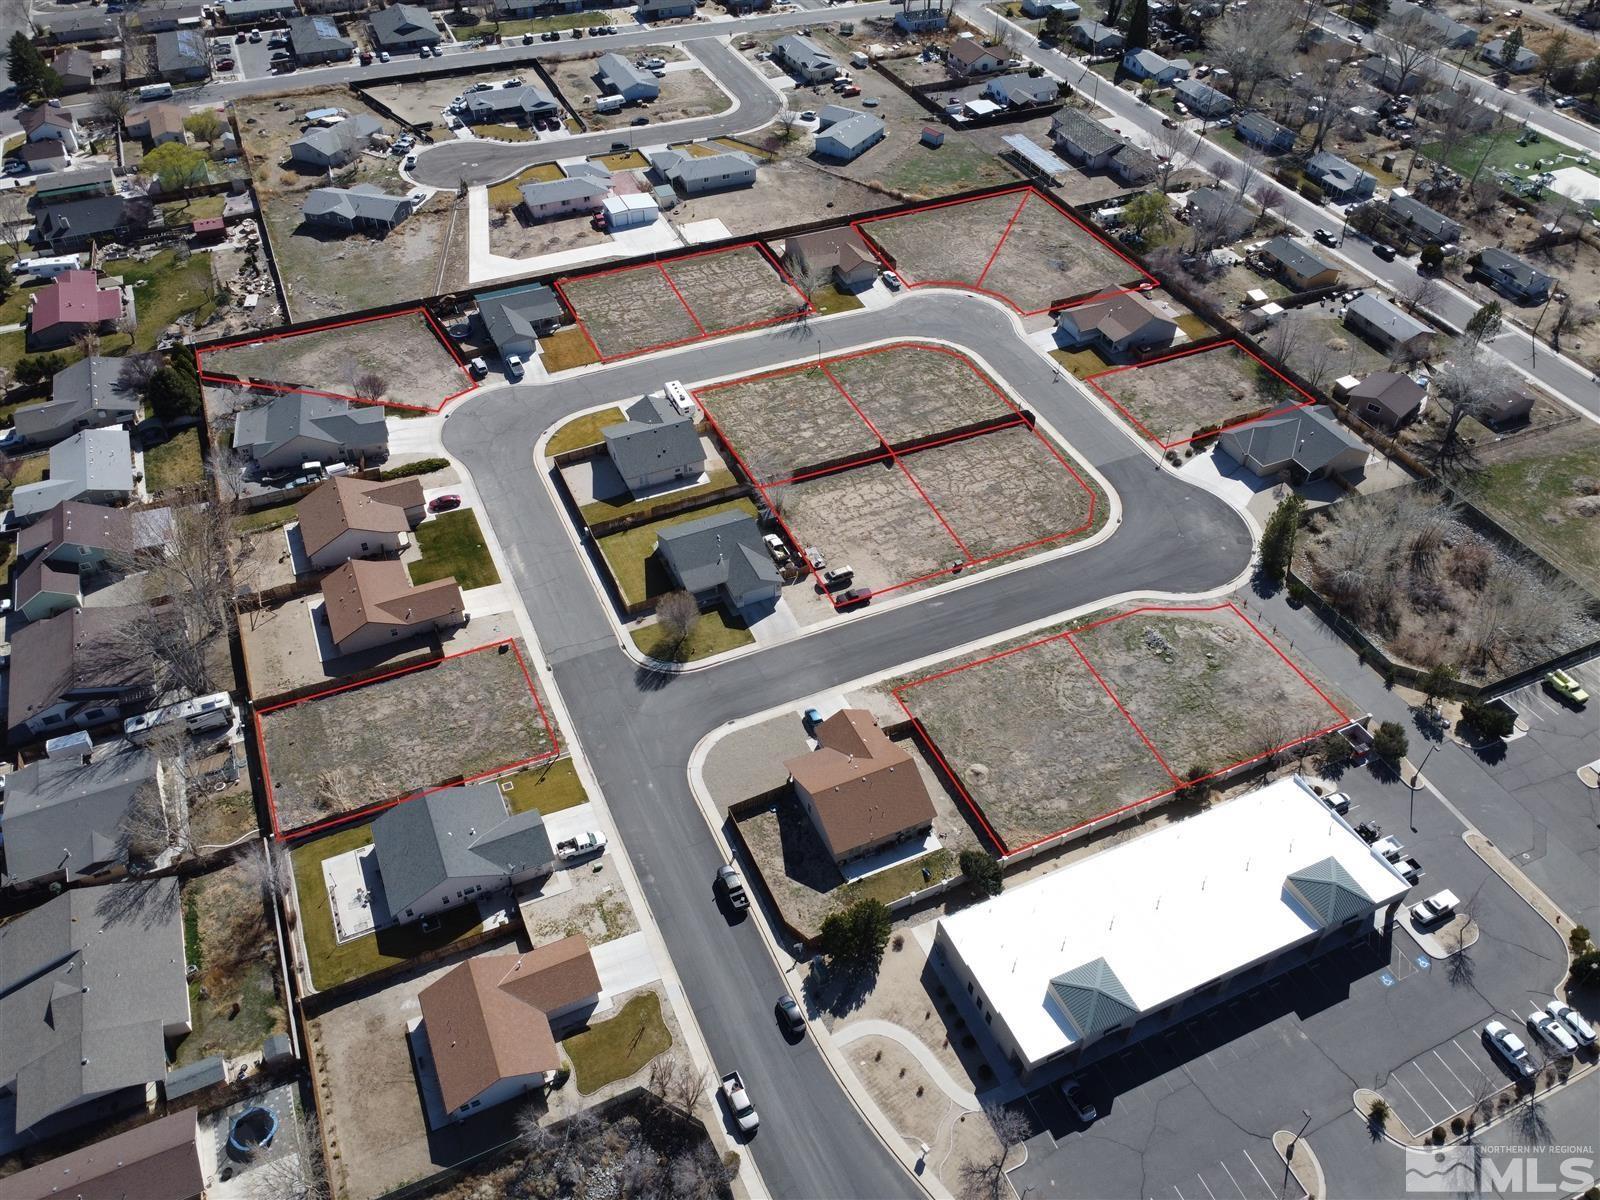 an aerial view of a multiple houses with a yard